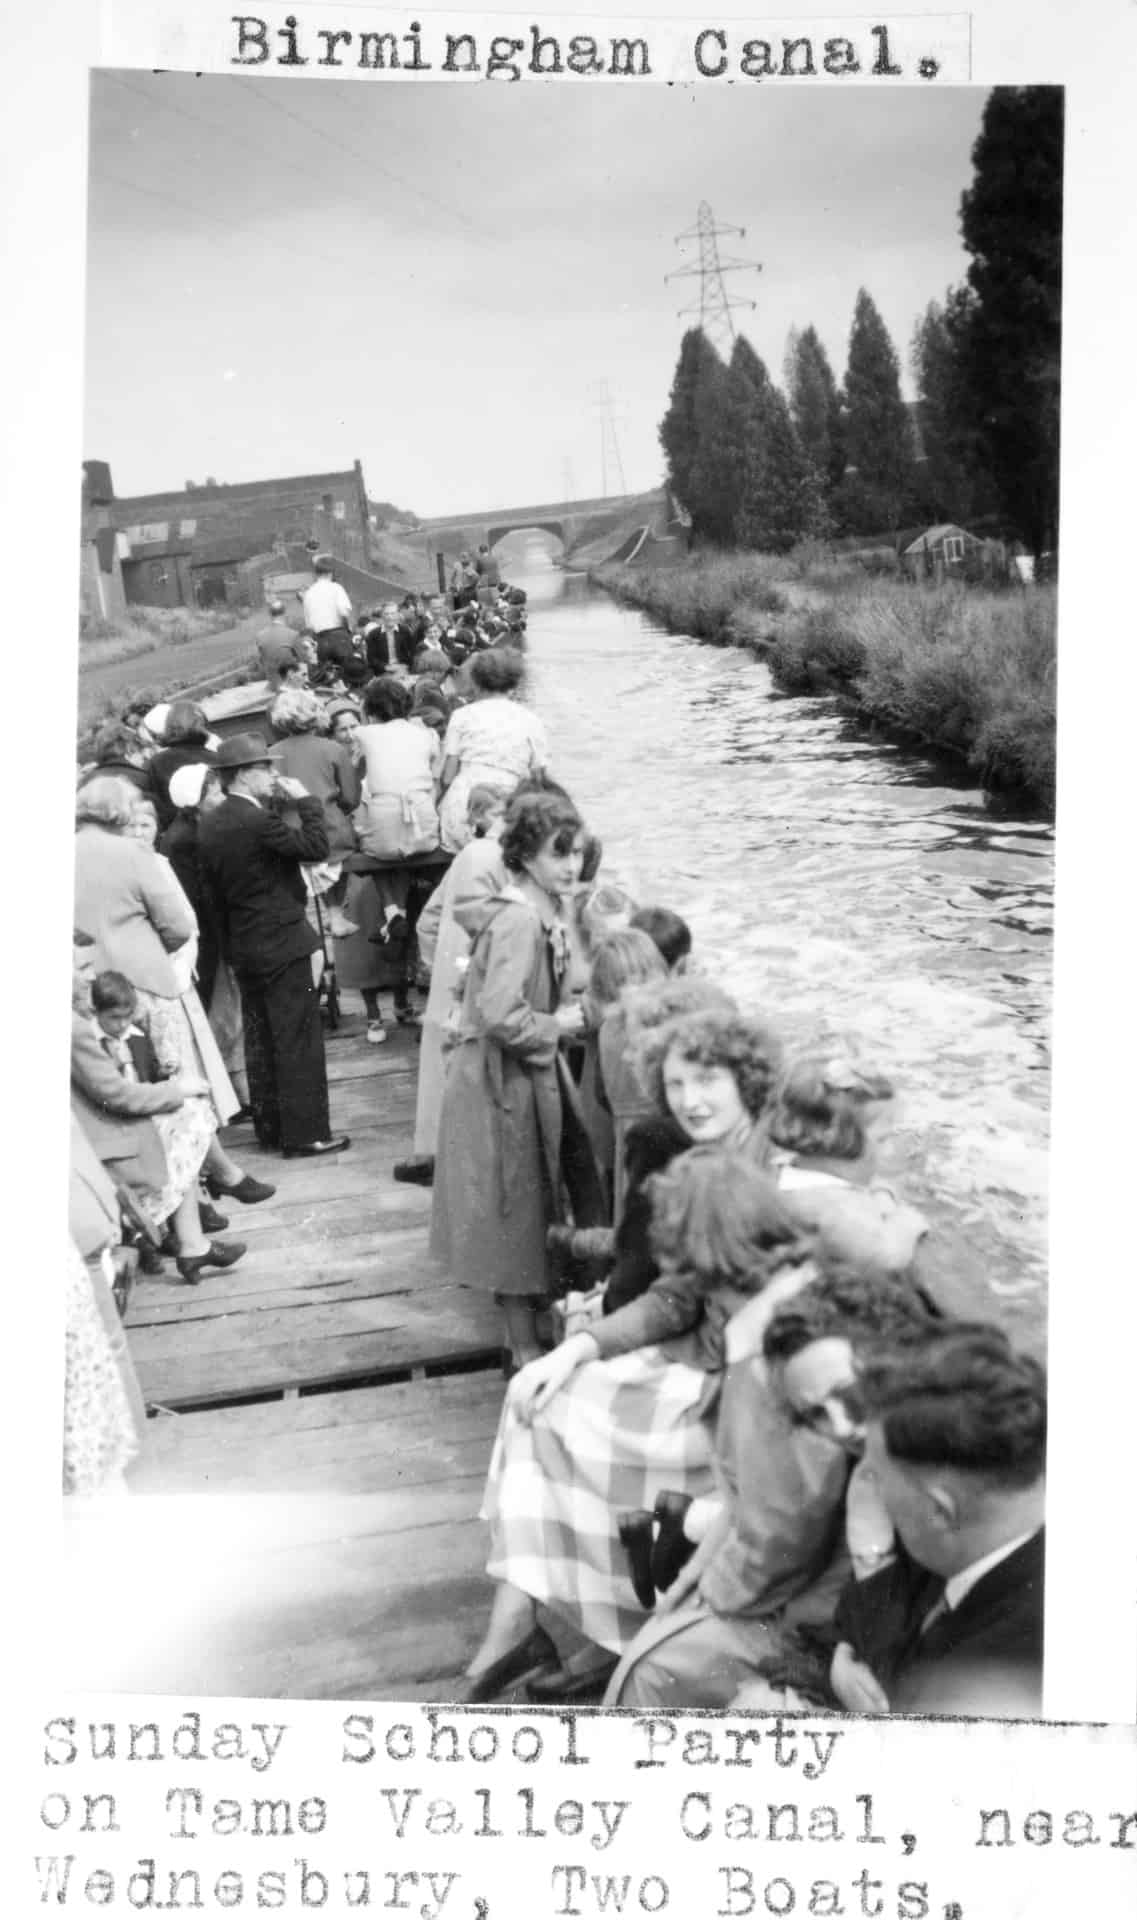 Sunday School Party on the Tame Valley Canal, 1950s